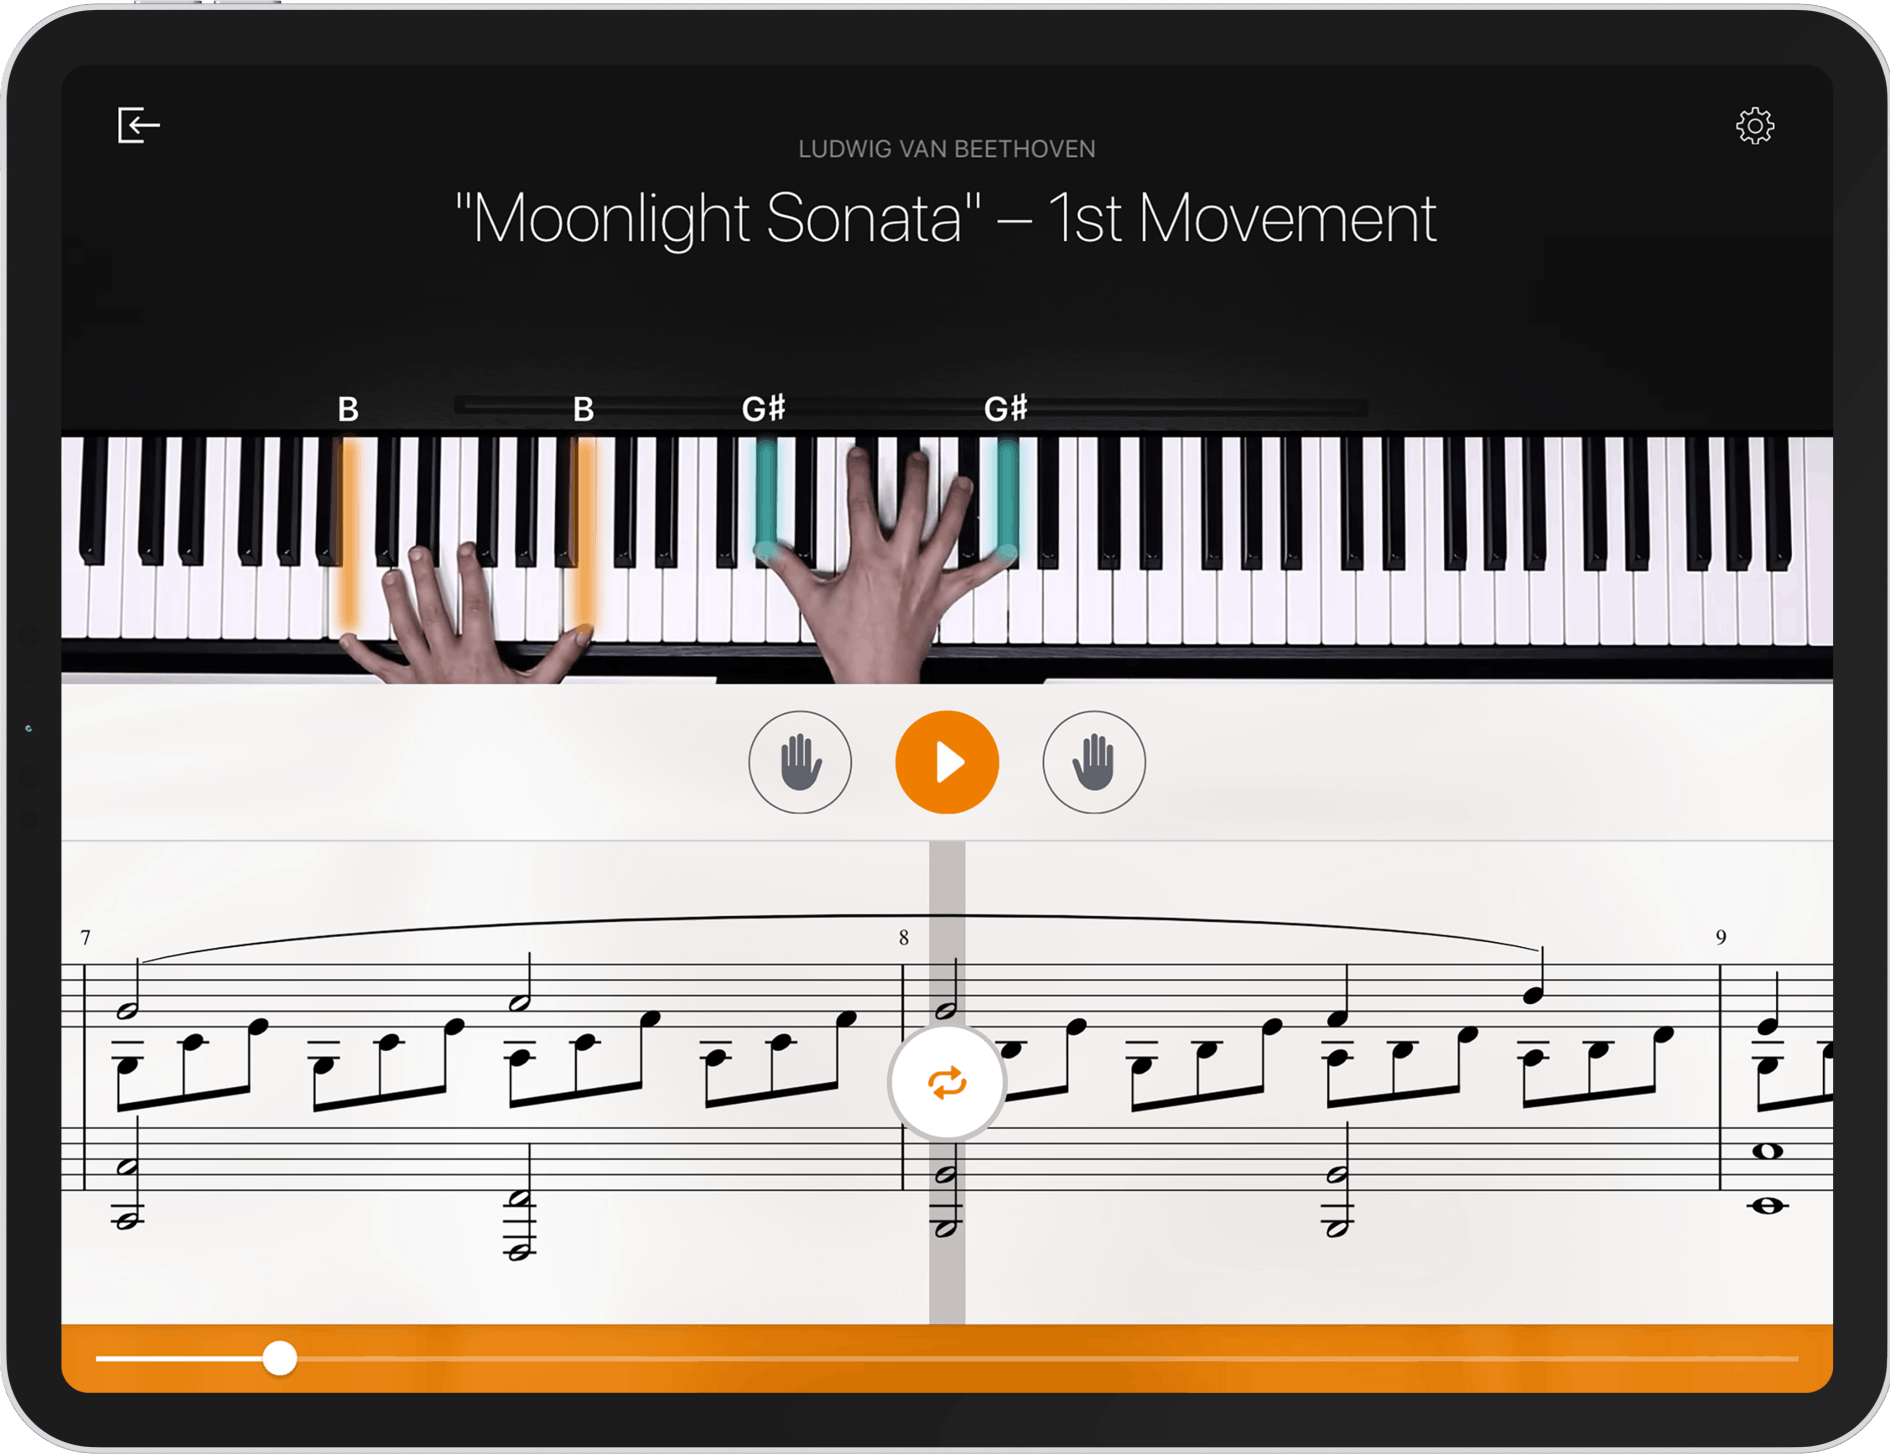 How to play piano: Learn to play with Musiah piano lessons